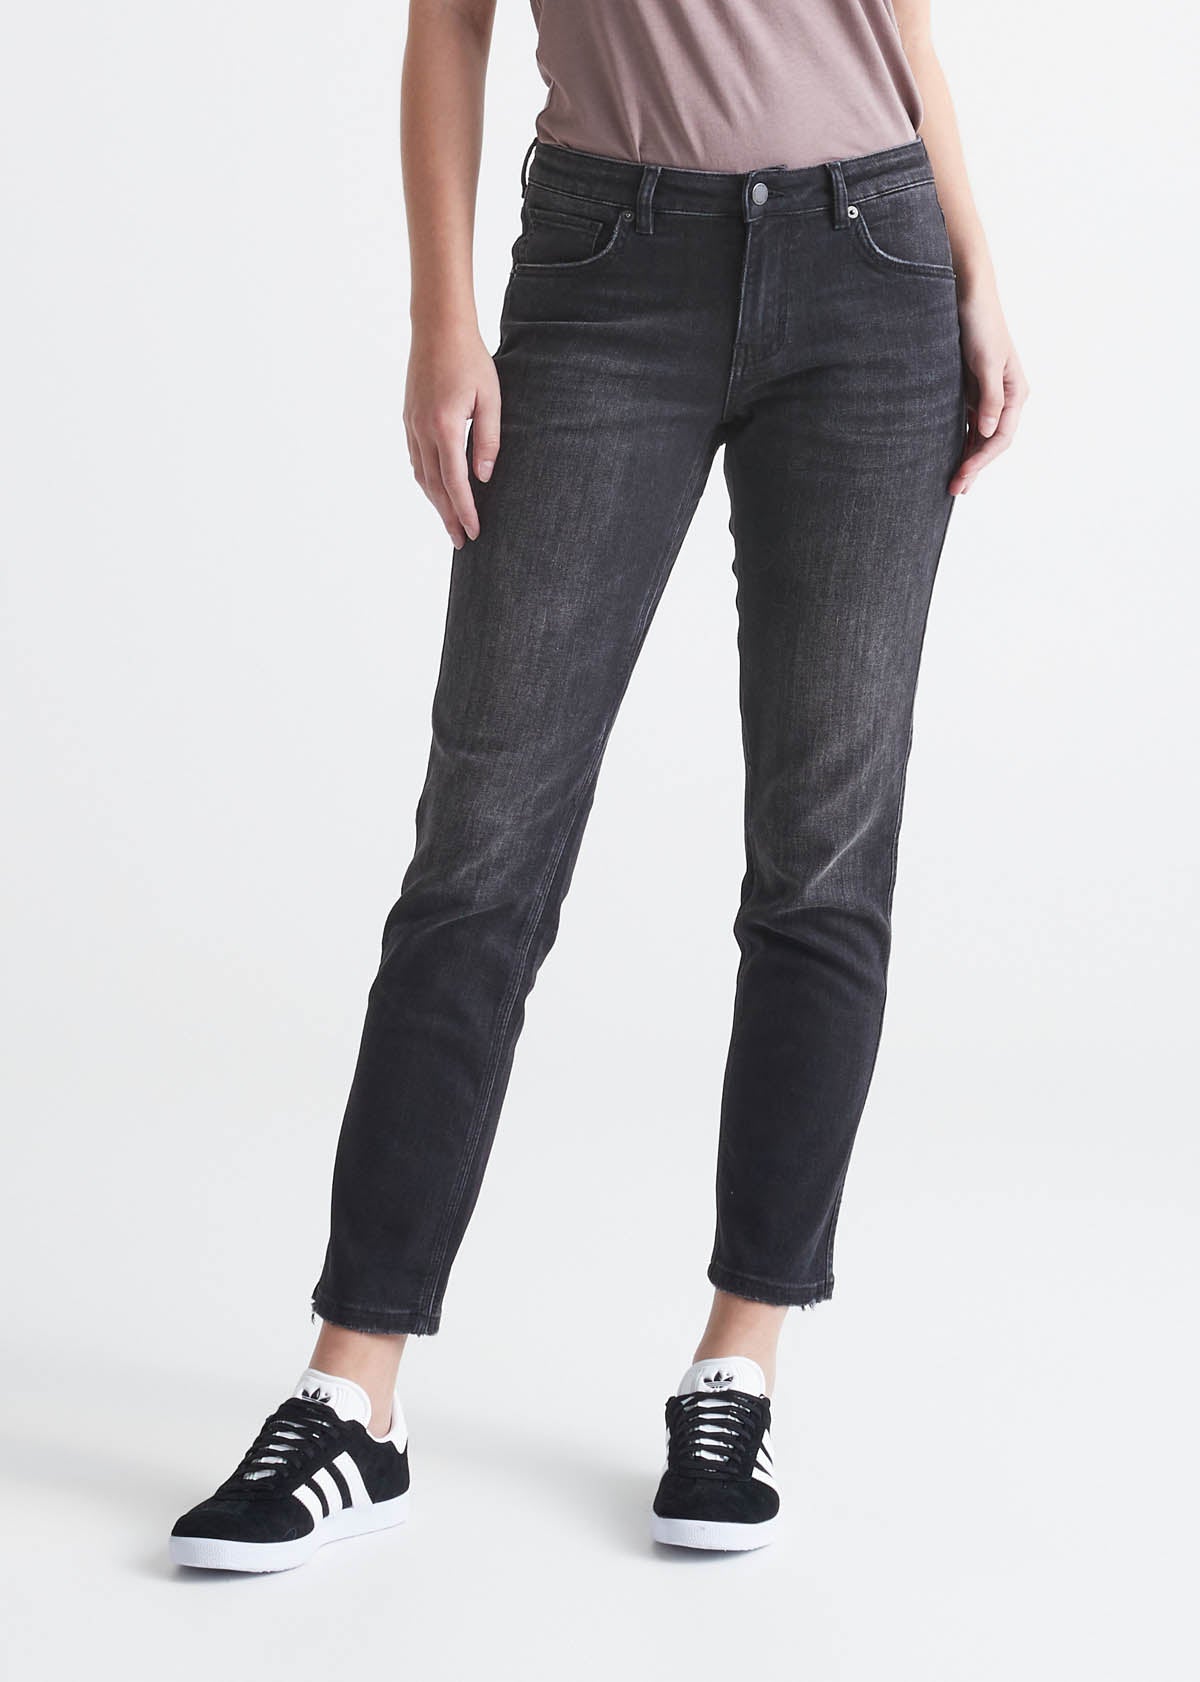 Women's Pants and Jeans